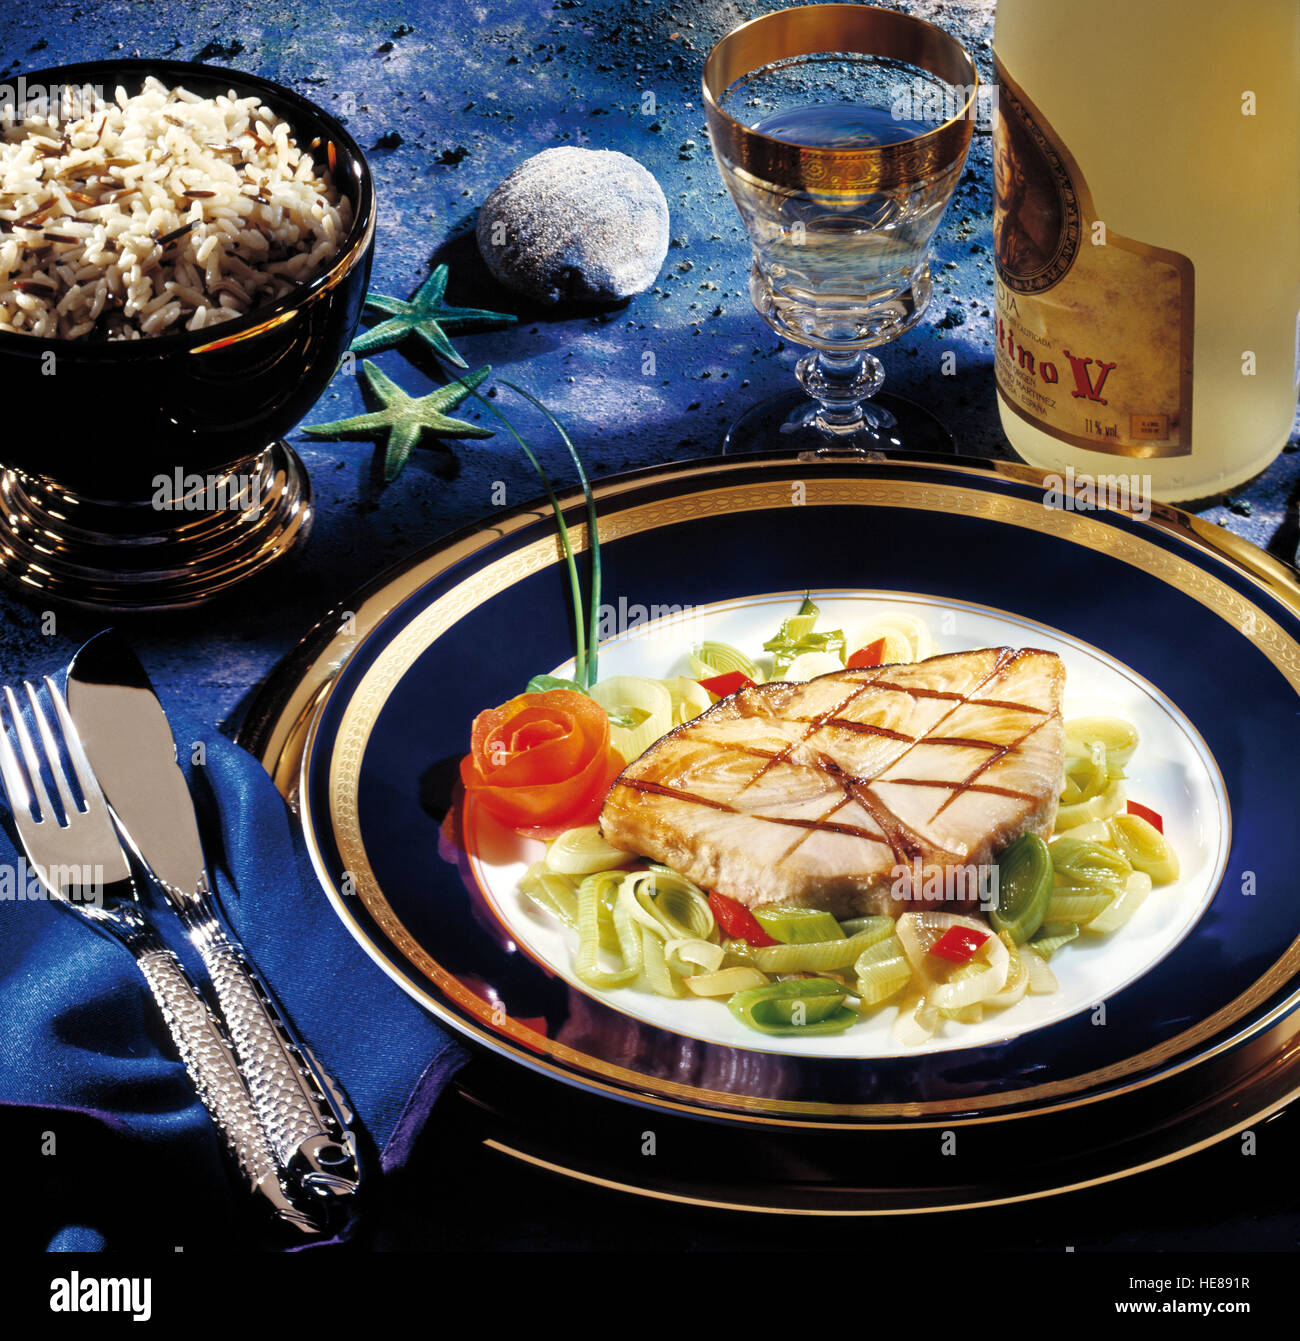 Grilled halibut steak with leeks and rice Stock Photo